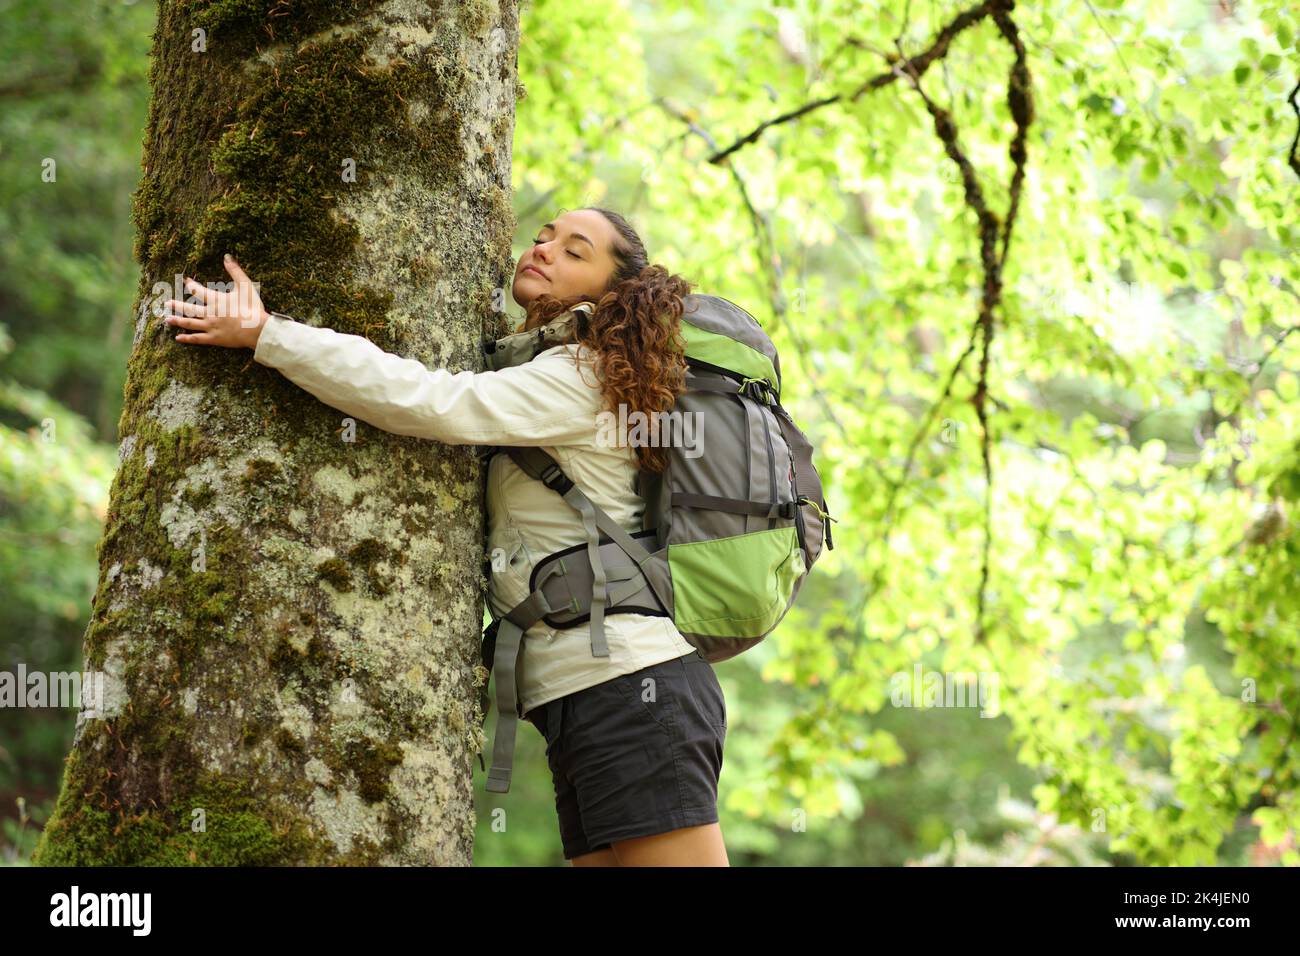 Hiker embracing a big tree in a forest Stock Photo